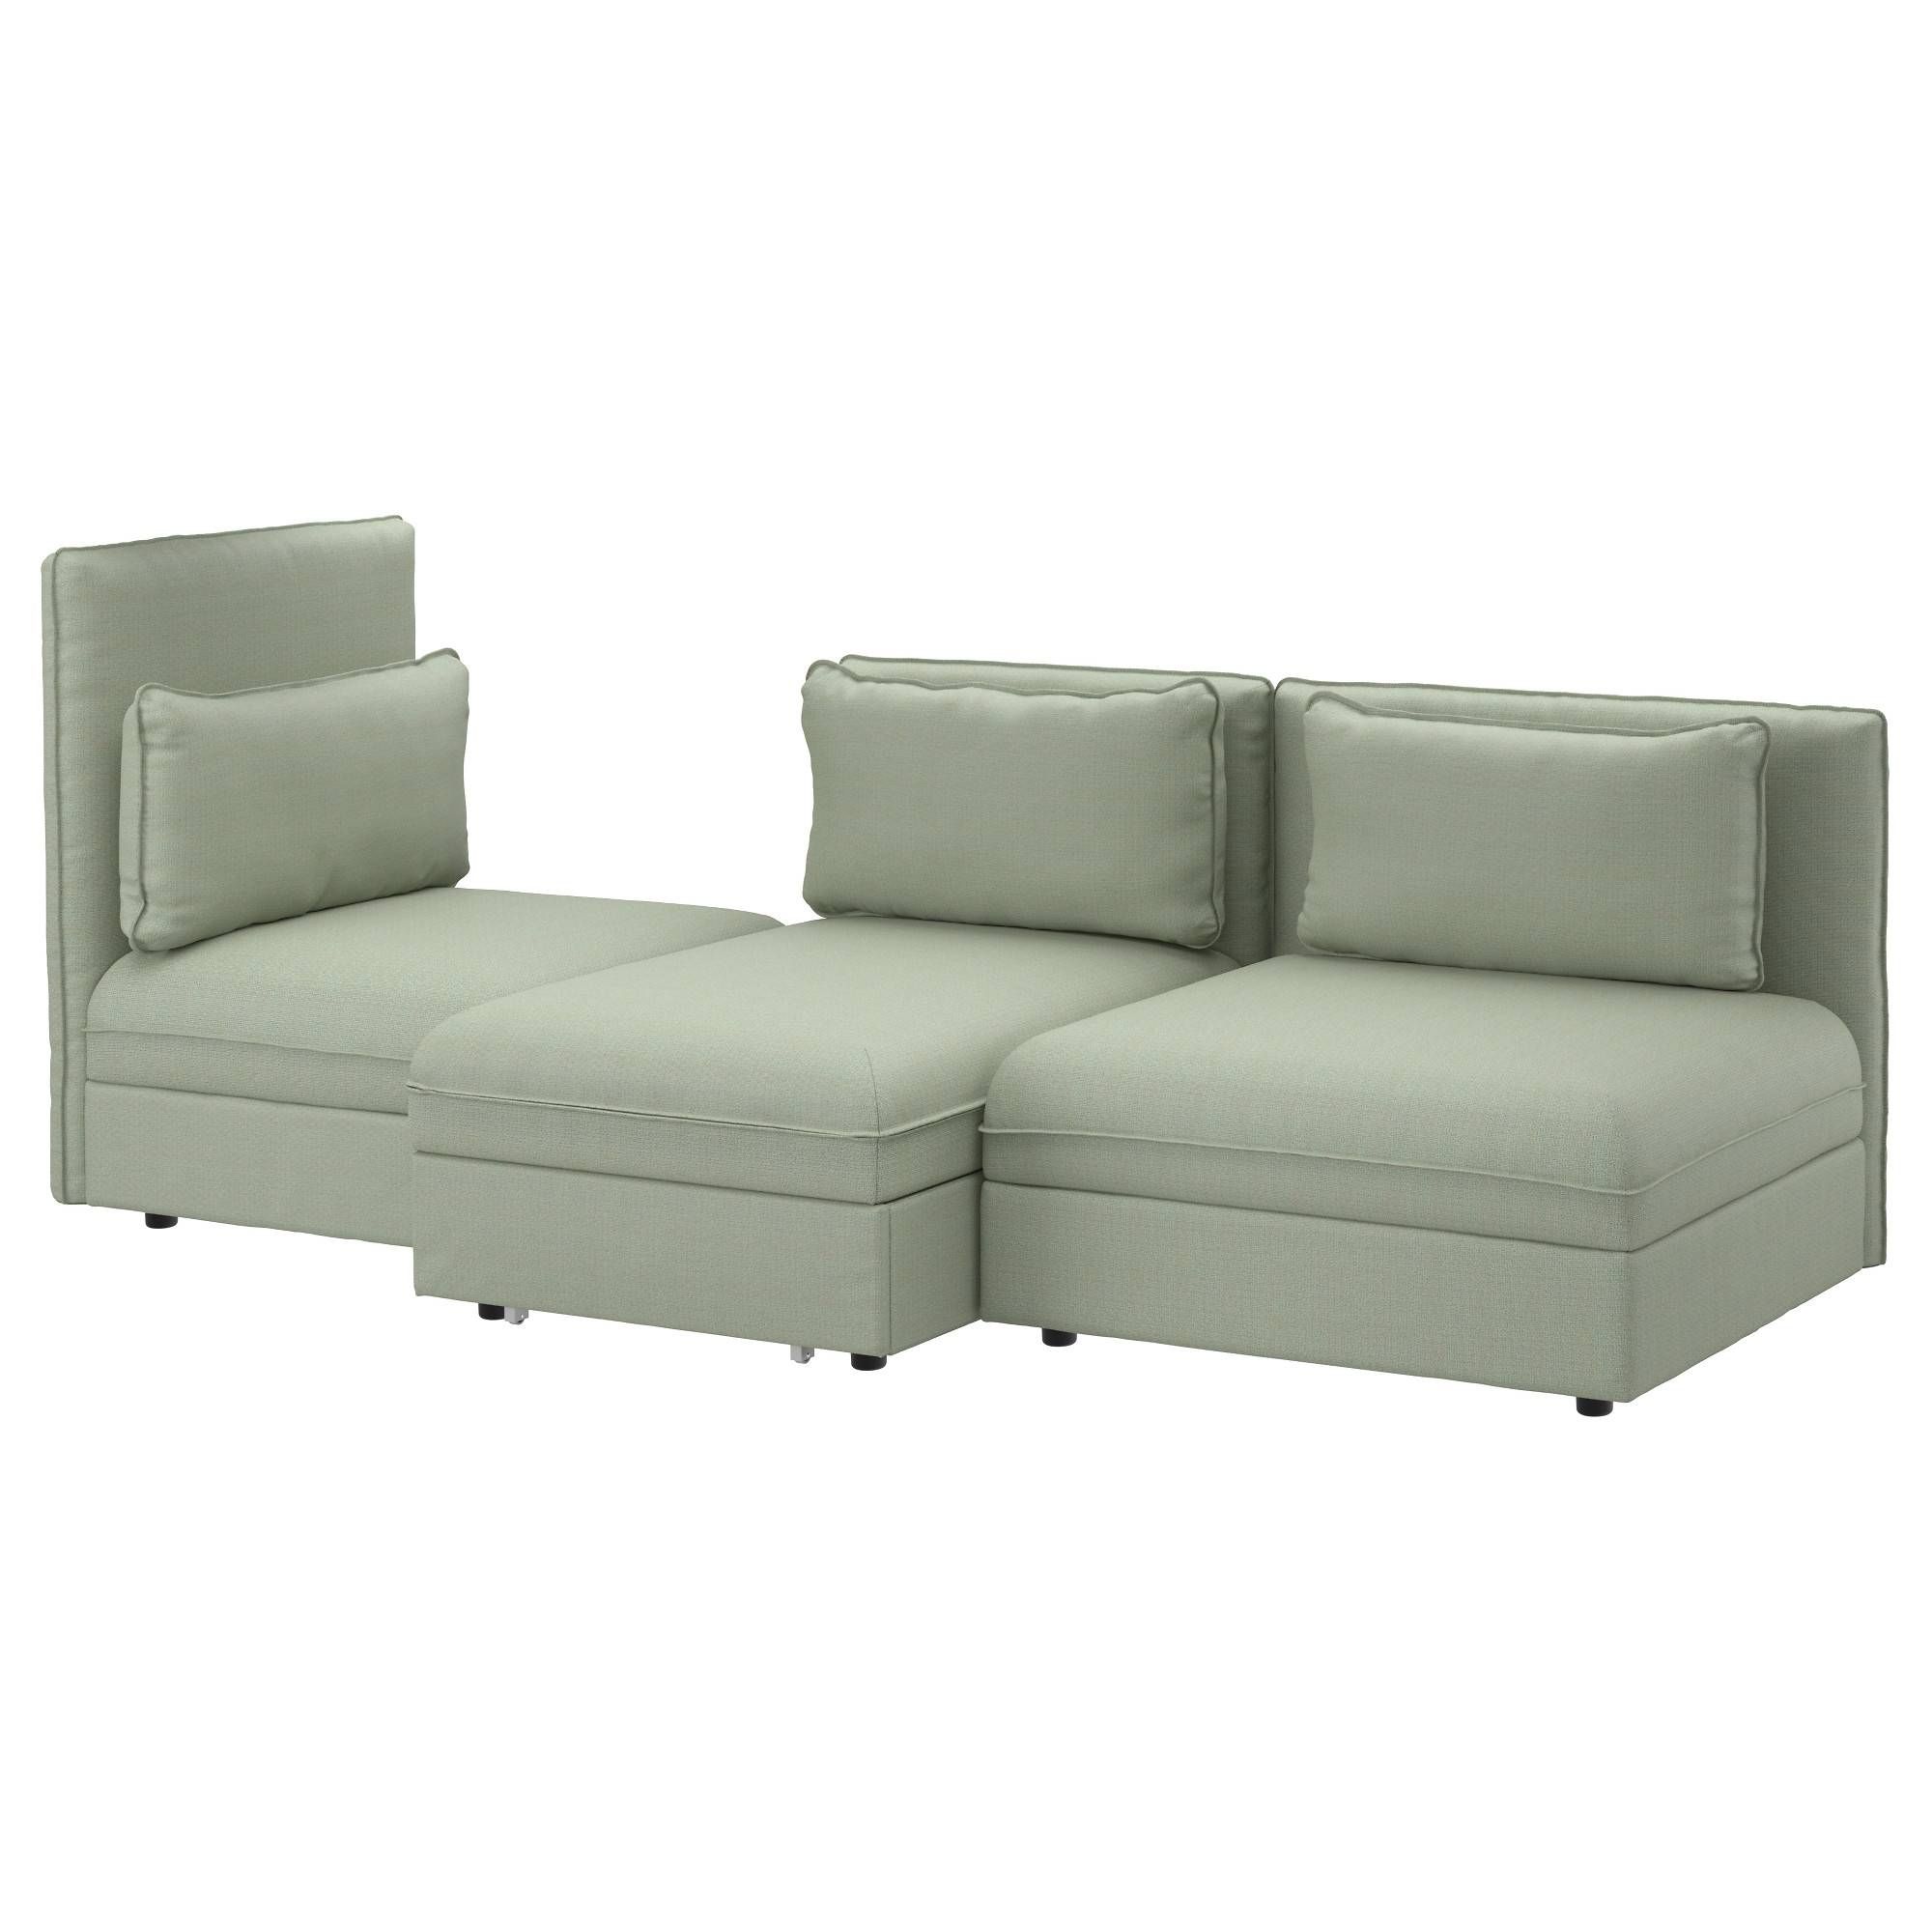 Sofa Beds & Futons – Ikea Regarding Sectional Sofa Bed With Storage (View 16 of 25)